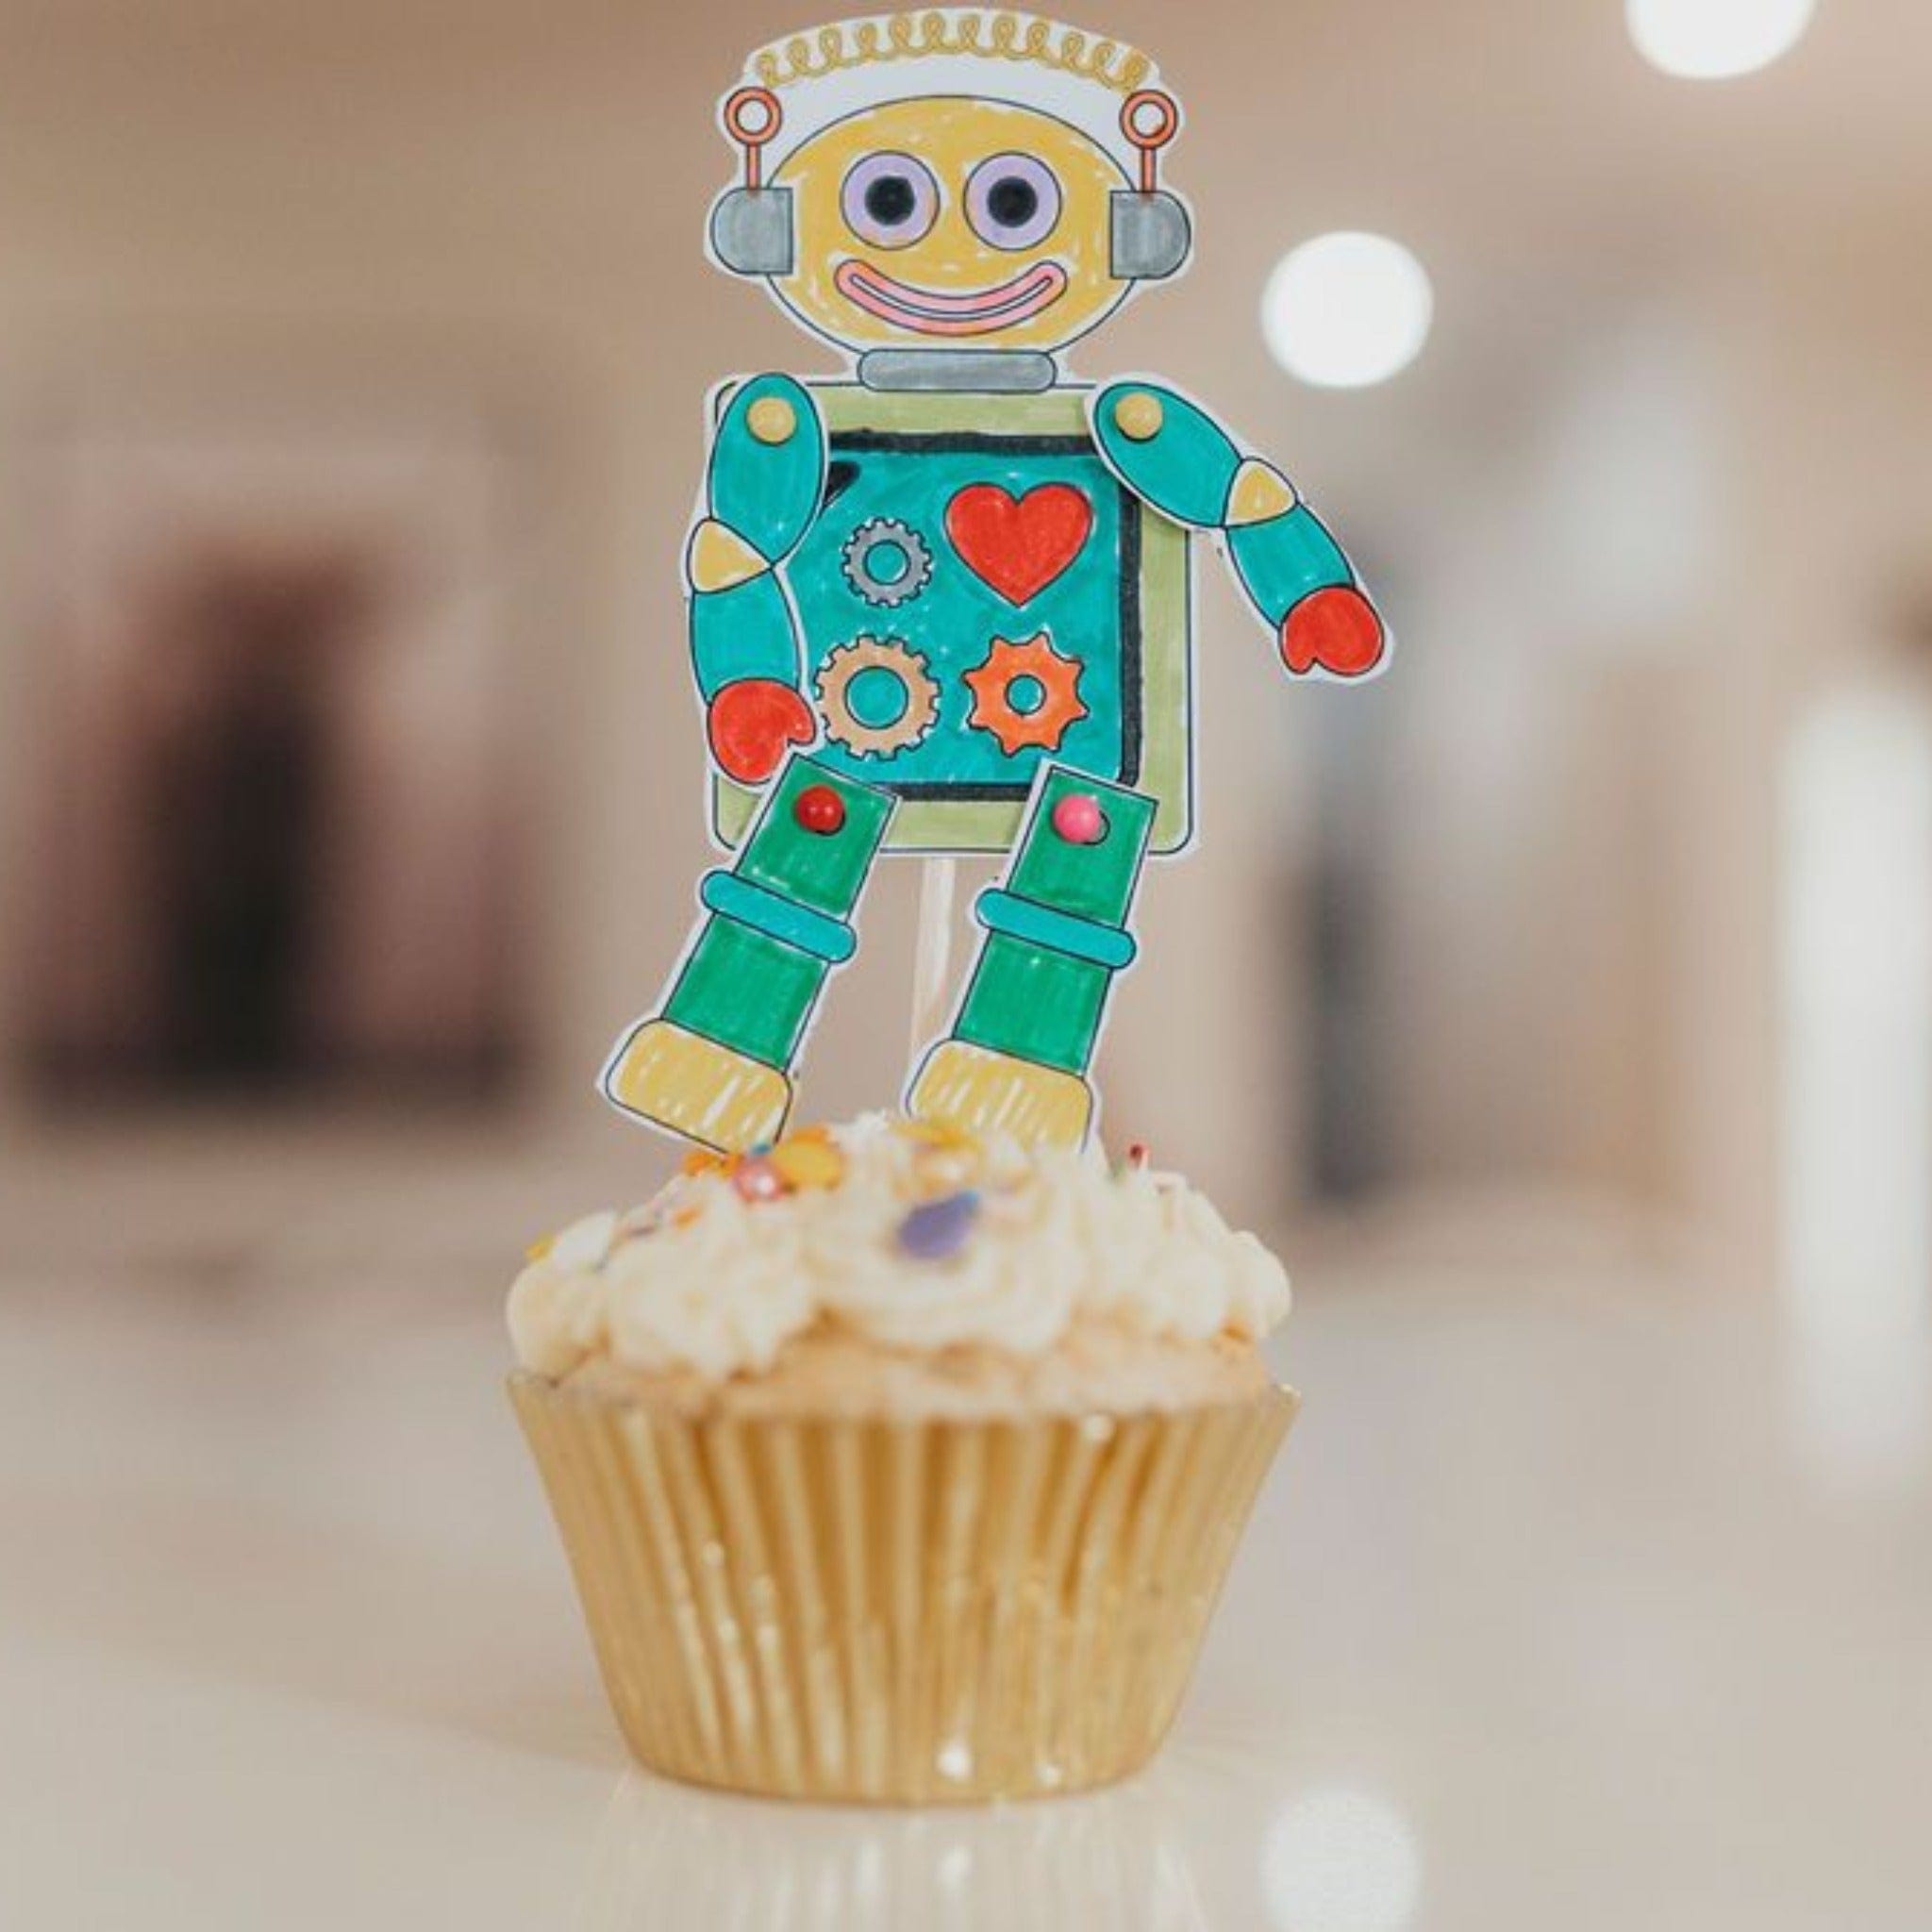 How to Make a 3D Robot Cake [with cake, buttercream and rice krispies] -  YouTube